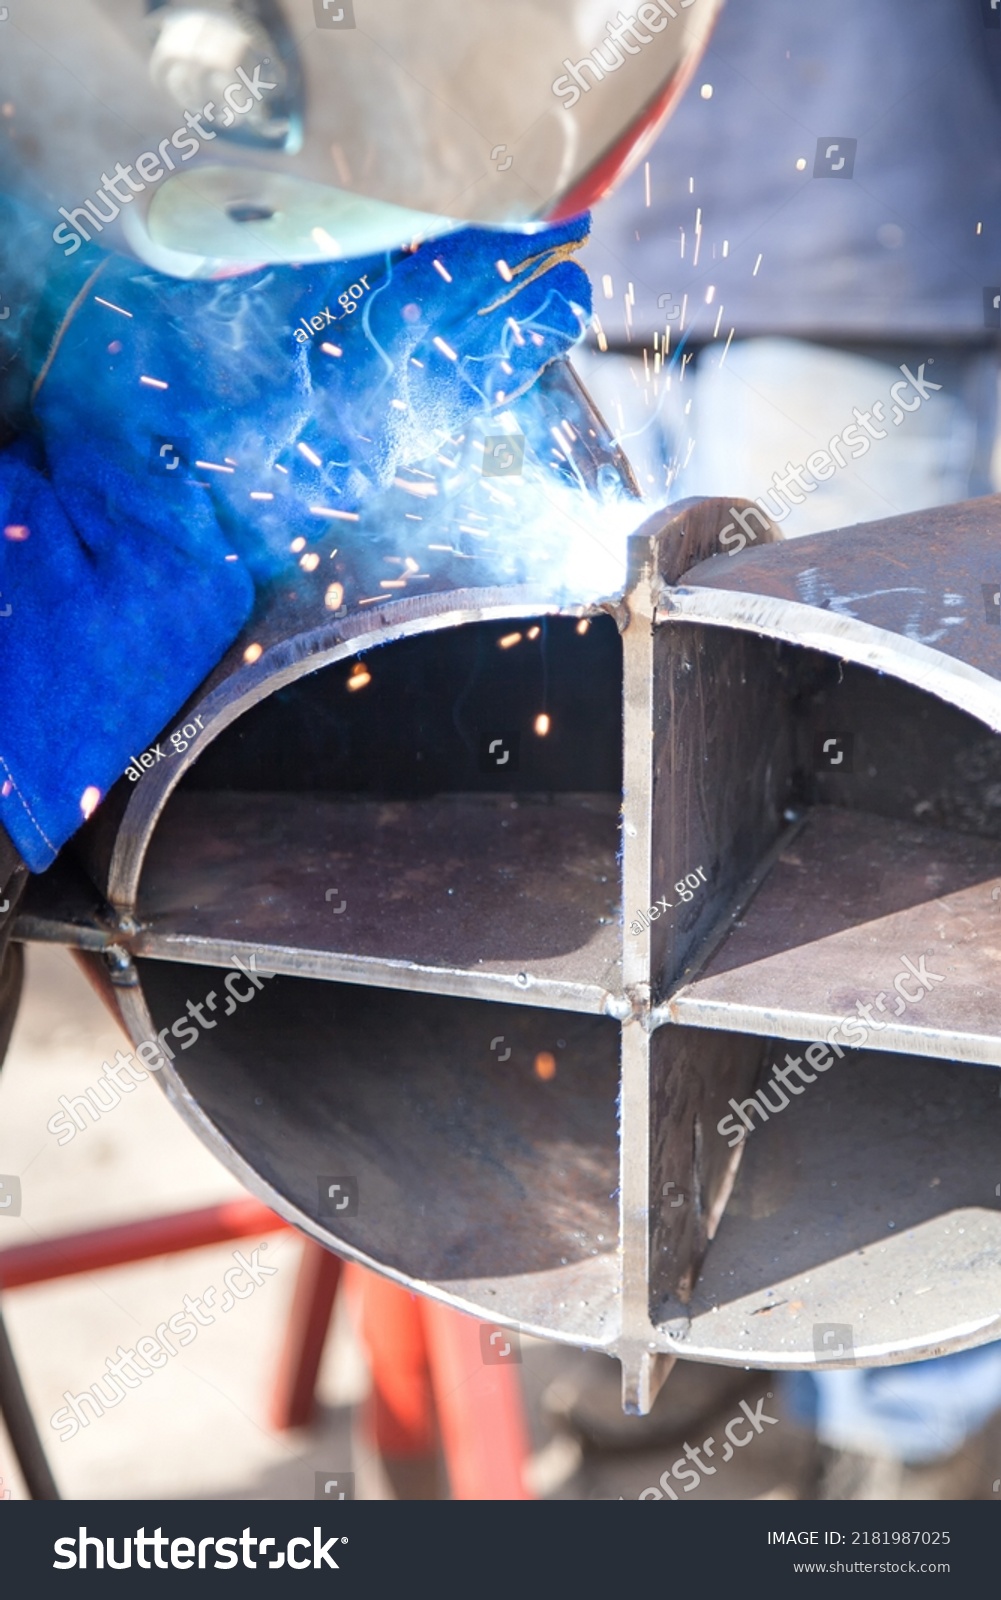 A professional welder in a protective suit and mask produces the connection of pipes with the help of a welding machine on the construction site. #2181987025